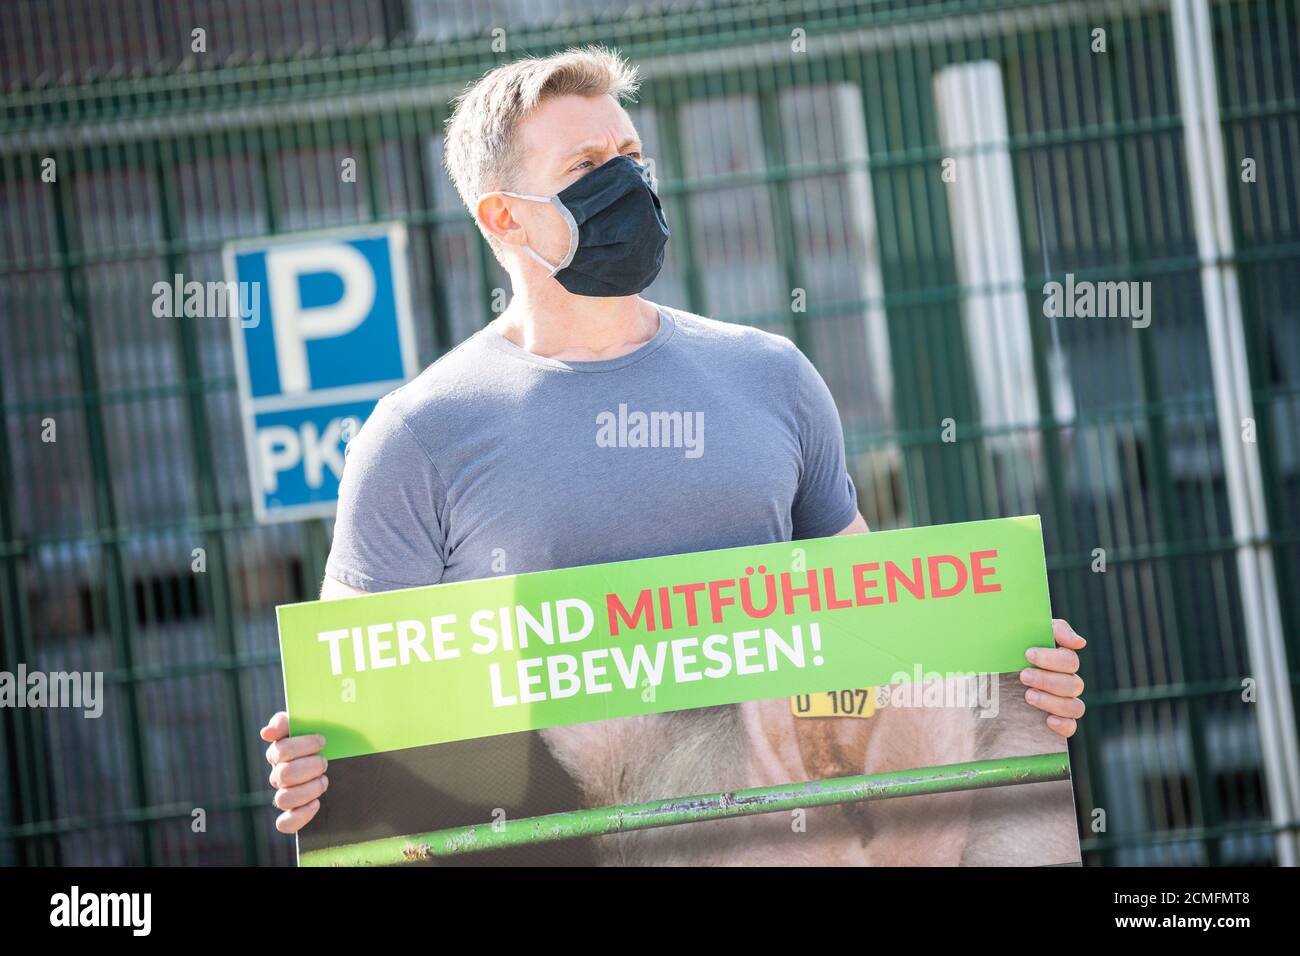 17 September 2020, Lower Saxony, Sögel: An animal protection activist stands with a protest sign saying 'Animals are compassionate living beings' in front of the premises of a slaughterhouse in Sögel after the discovery of deficiencies and violations in a nearby pig fattening farm in the Emsland district. According to the association 'Deutsches Tierschutzbüro', the company in Sögel is one of the main purchasers of pigs from the fattening farm in question and is part of the Tönnies group of companies. The Tönnies group defended itself against the accusations of the animal rights organization. P Stock Photo